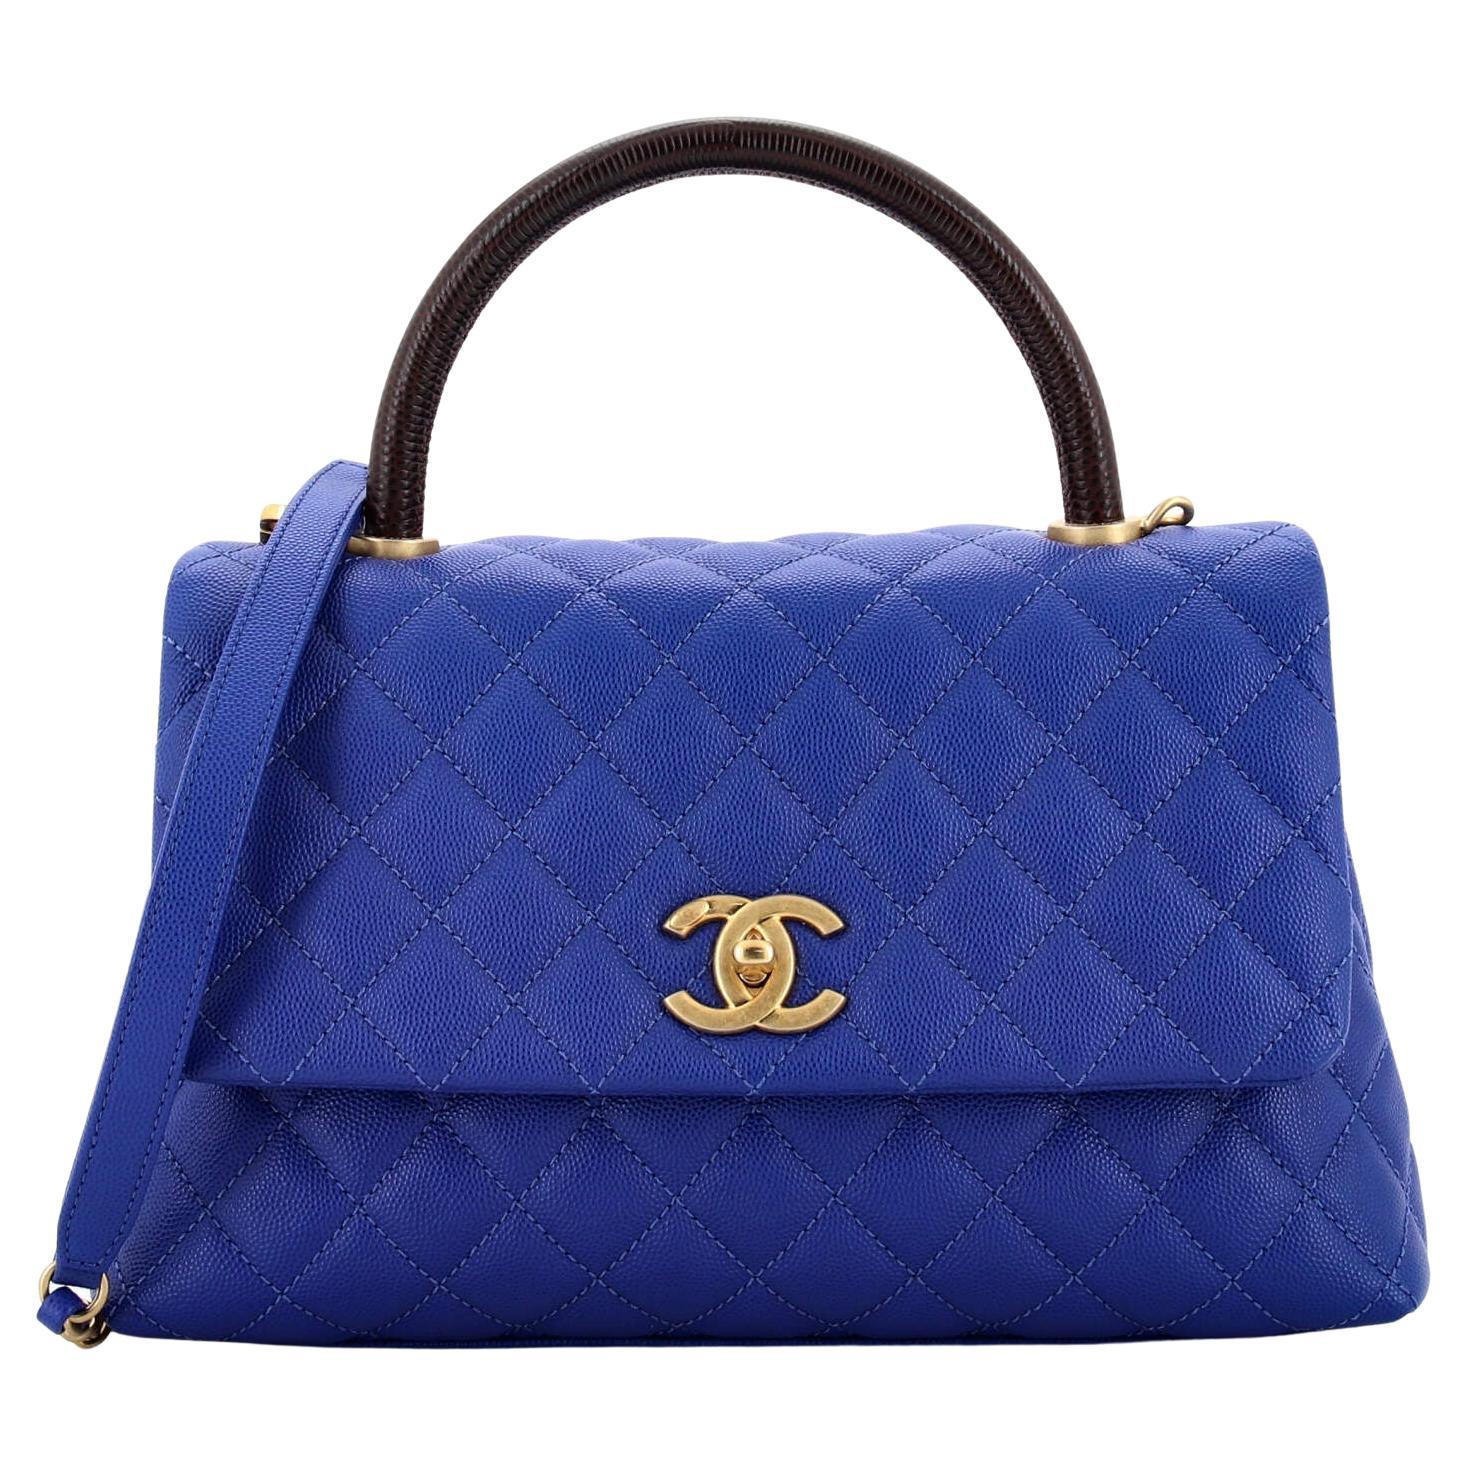 Chanel Coco Top Handle Bag Quilted Caviar Small